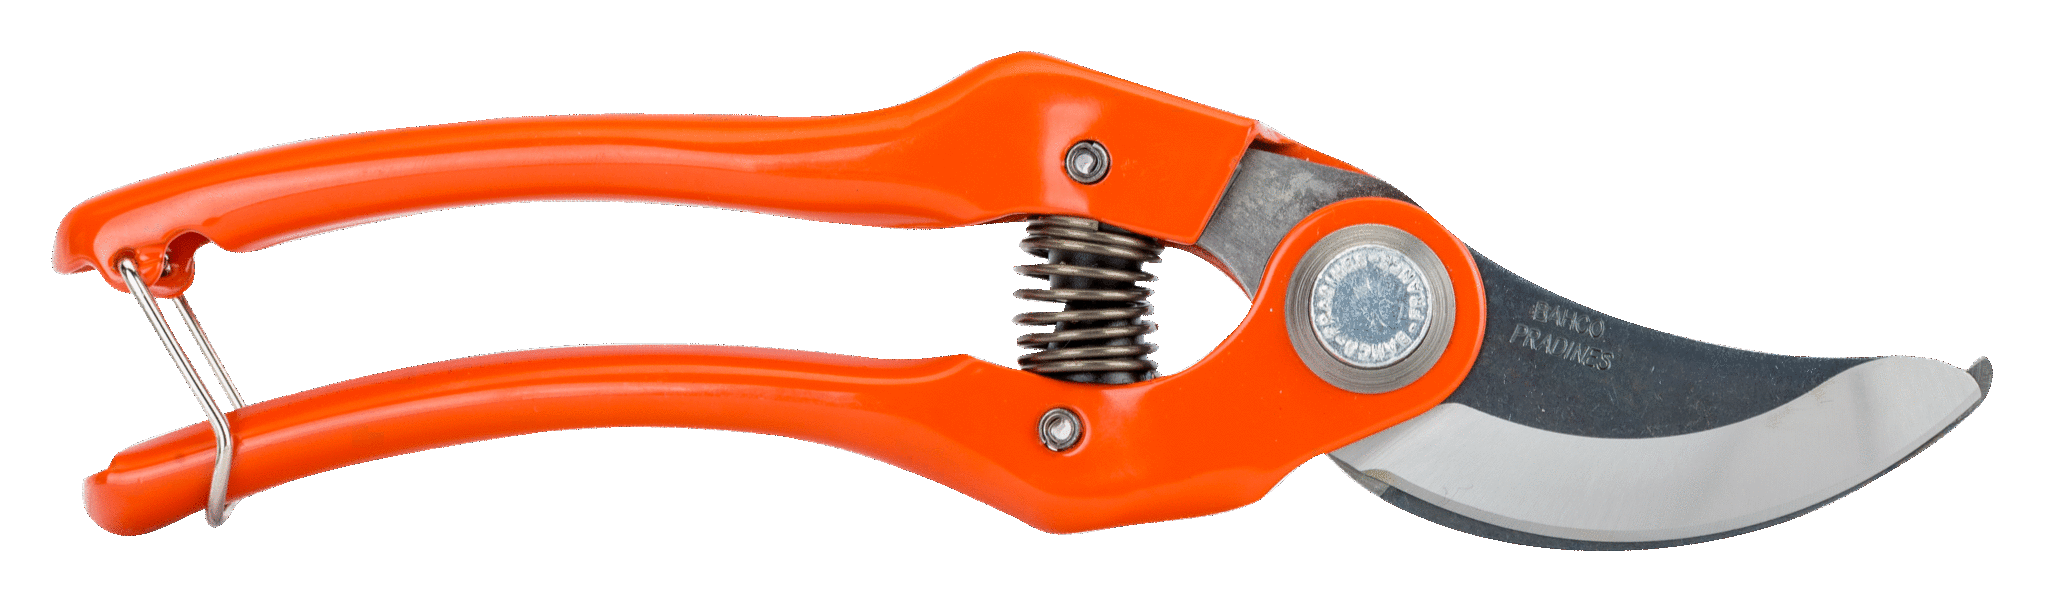 Bypass Secateurs with Stamped/Pressed Steel Handle & Angled Cutting Head - P121-20-F by Bahco